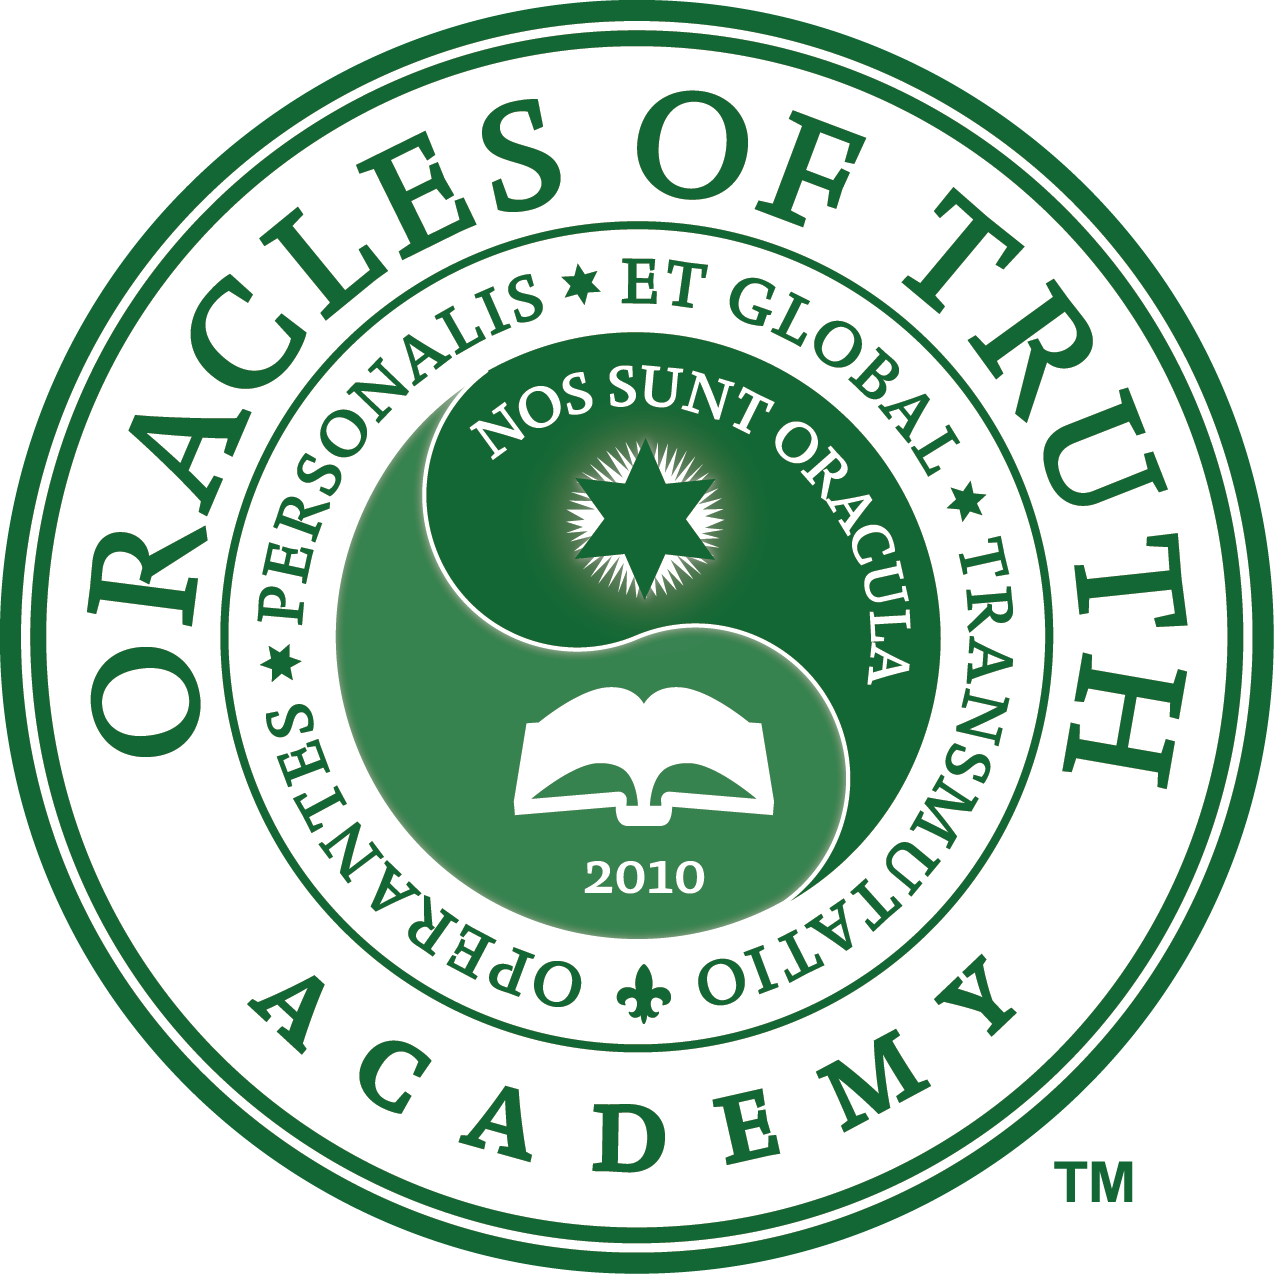 Oracles of Truth Academy